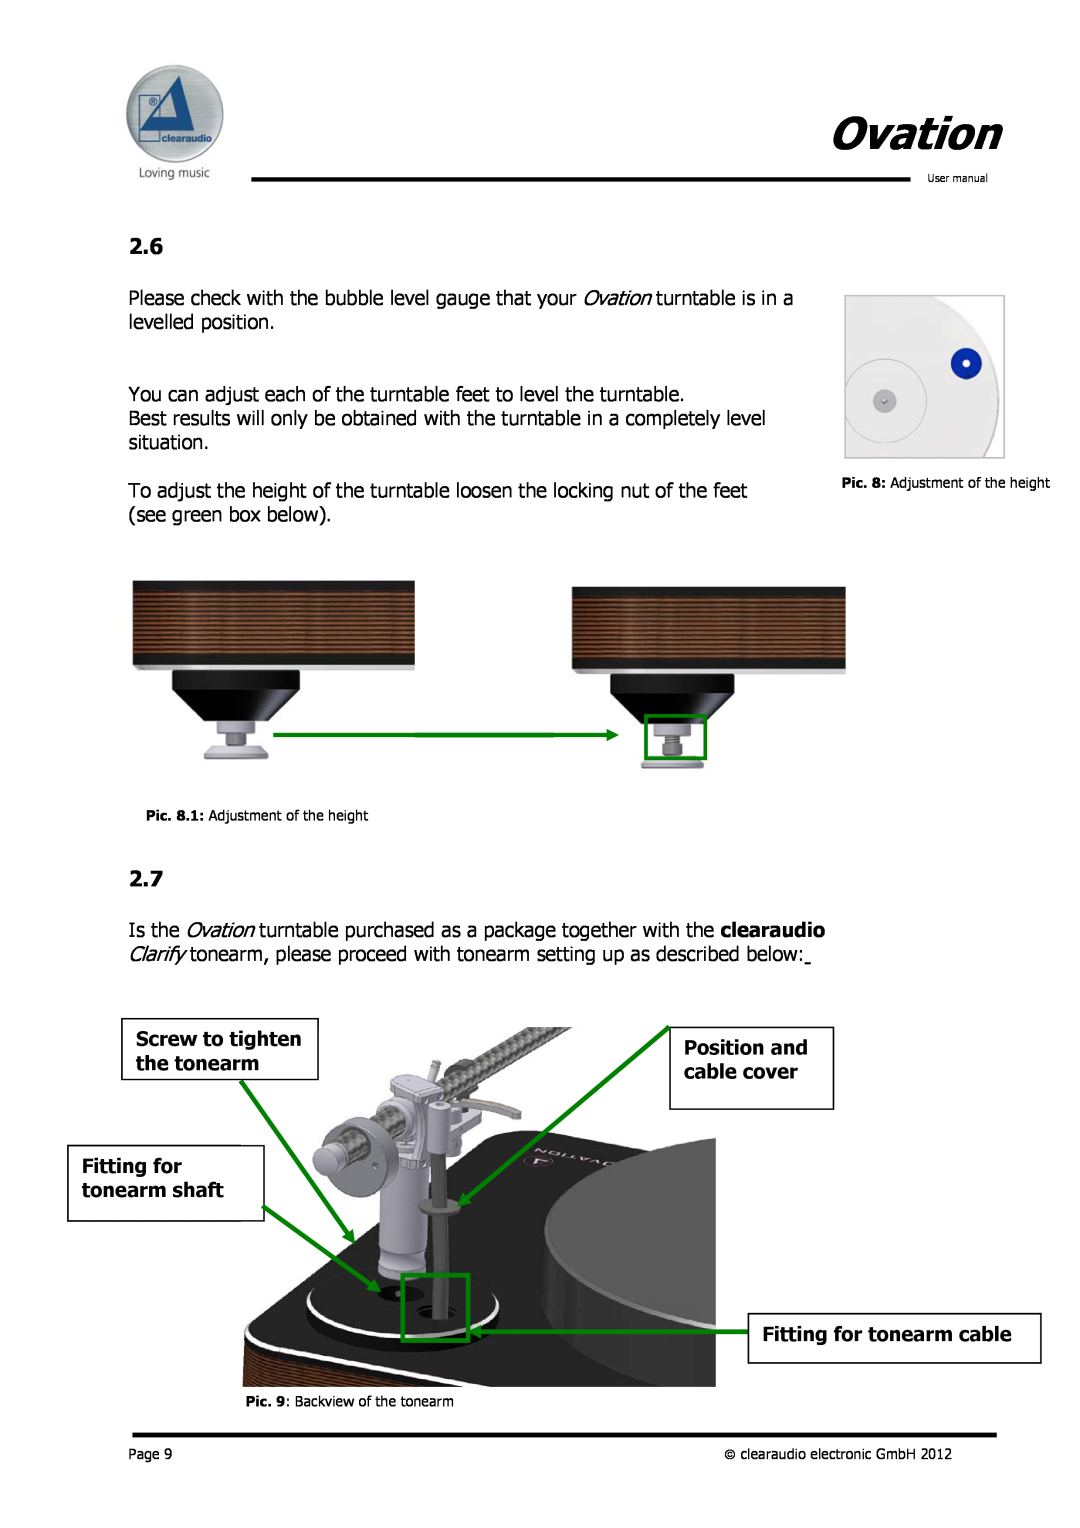 Clearaudio Version-1.4_12_03_08_E user manual Ovation, Screw to tighten the tonearm, Fitting for tonearm shaft, Page 